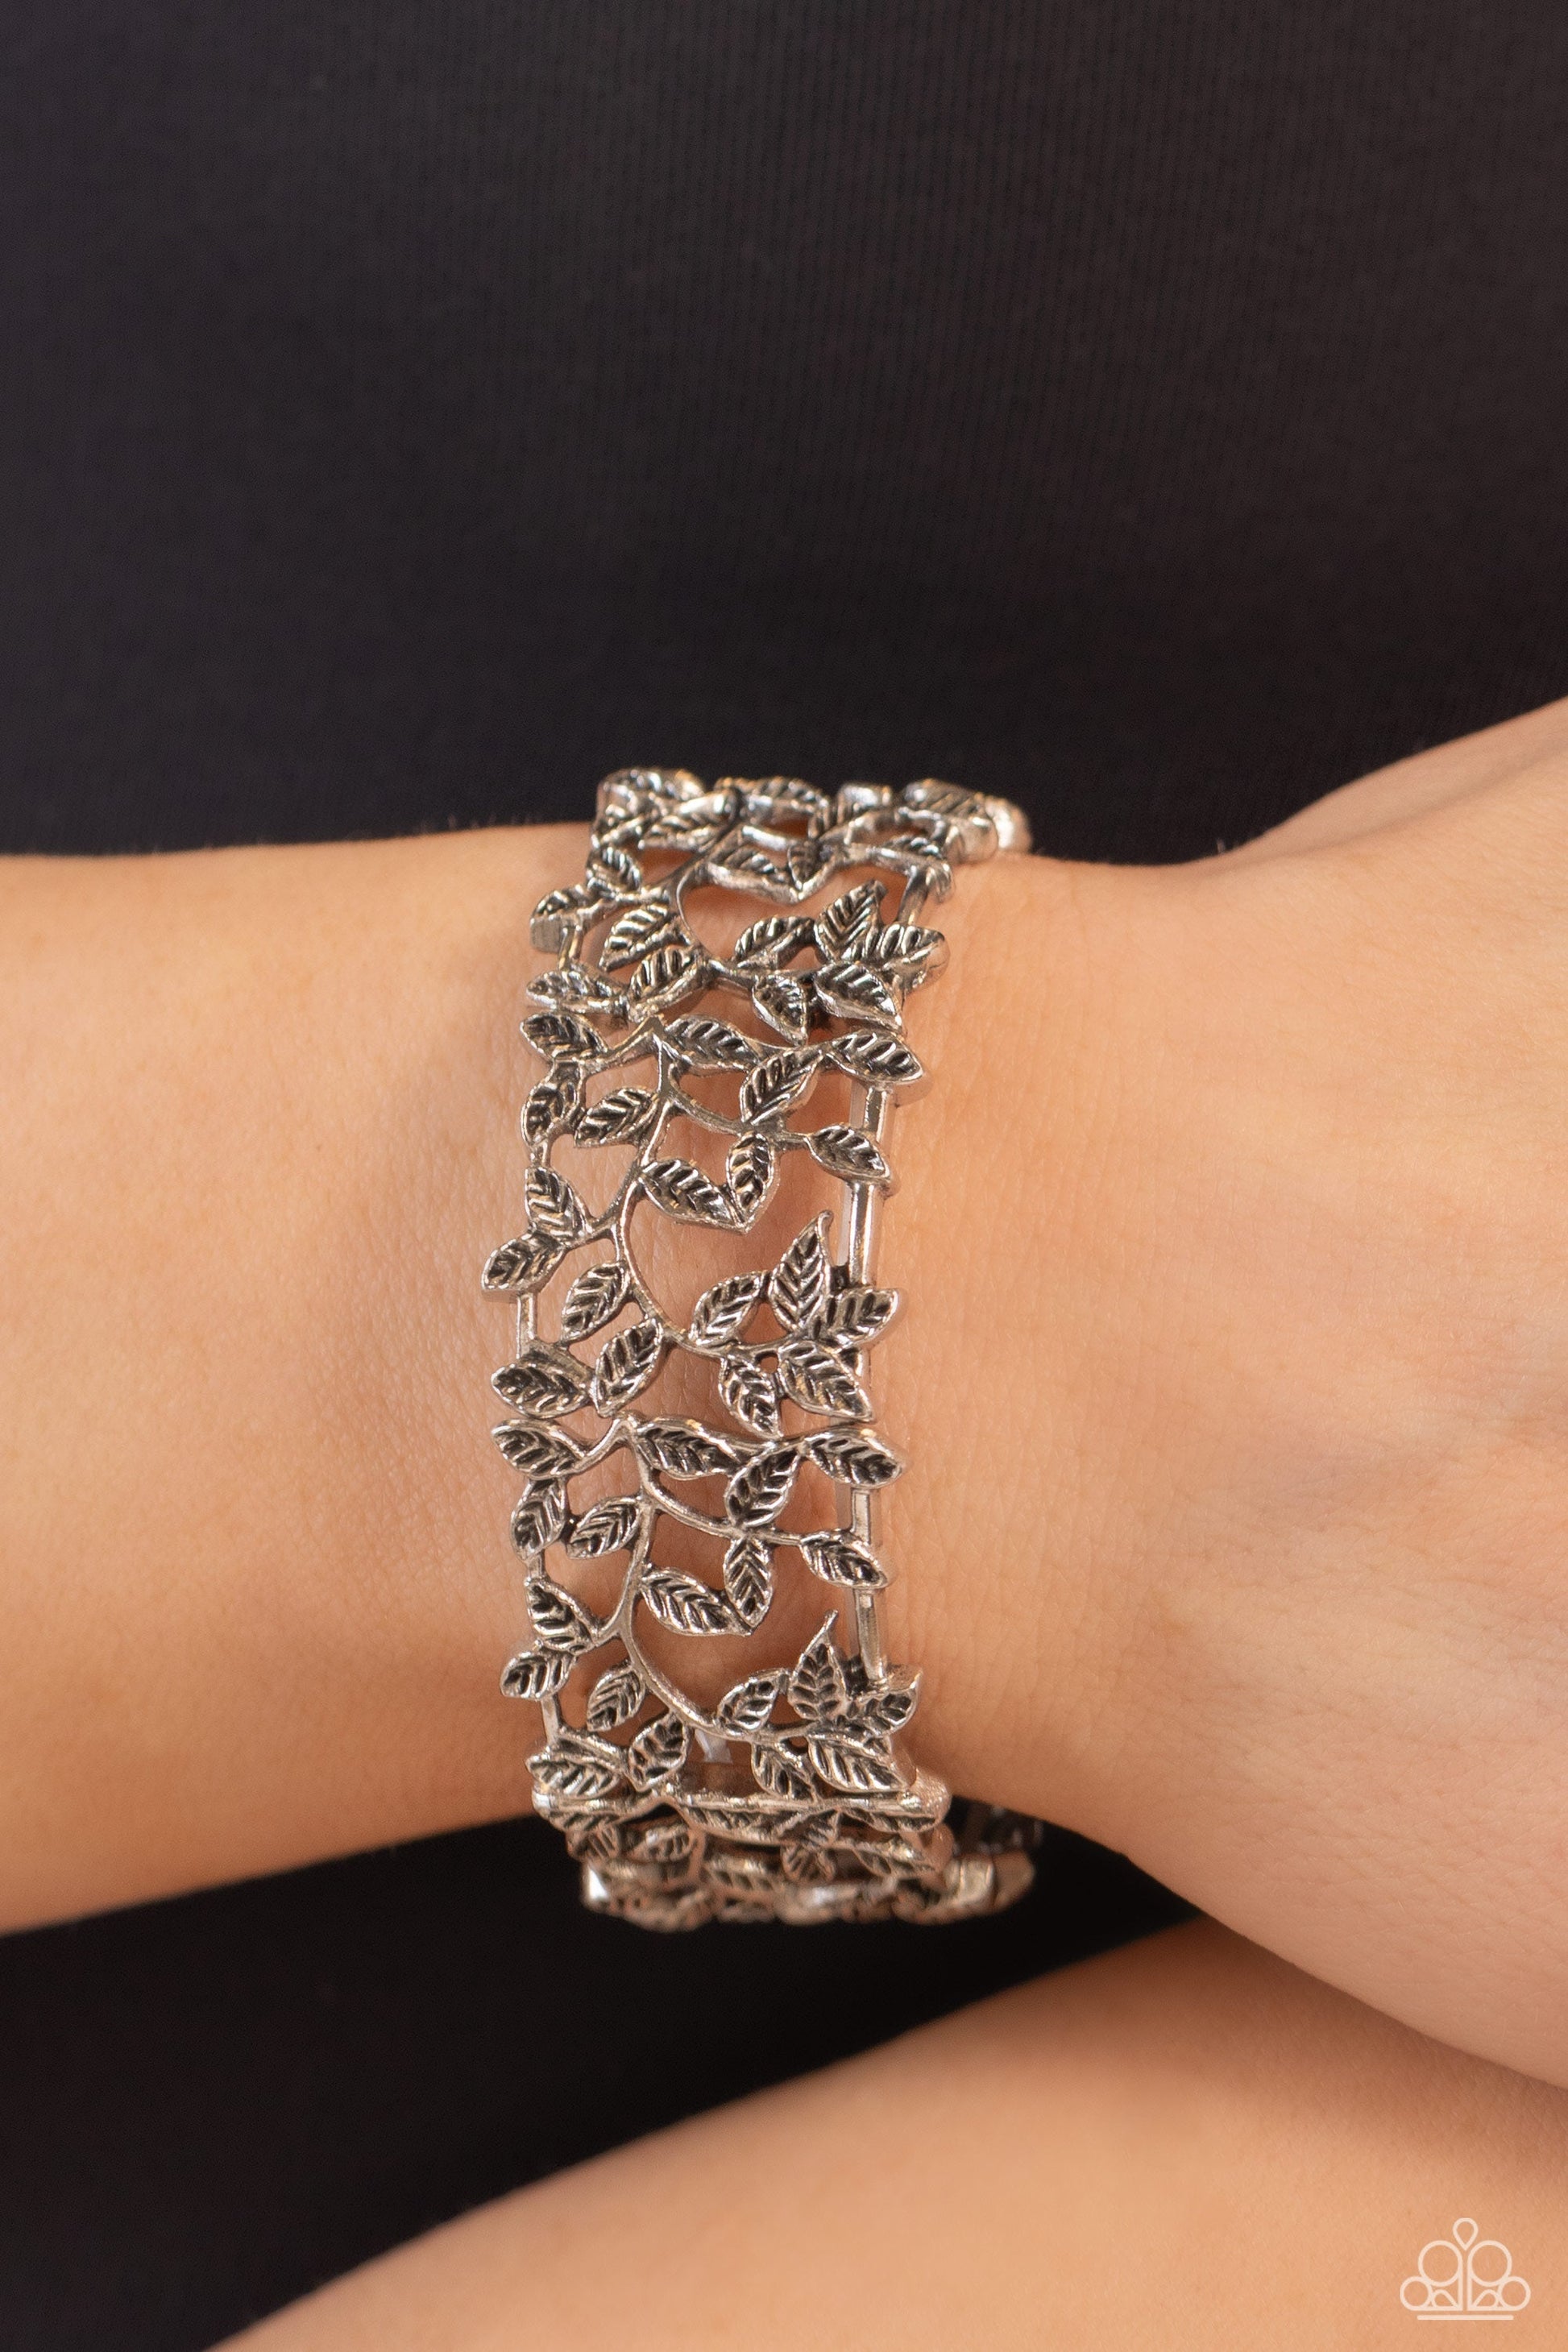 Whose Vine Is It Anyway? Silver Bracelet - Paparazzi Accessories - Dotted with intricate textures, shiny silver filigree vines with tactile leaves, as they twist and wind across the wrist on elastic stretchy bands for a whimsical look. 